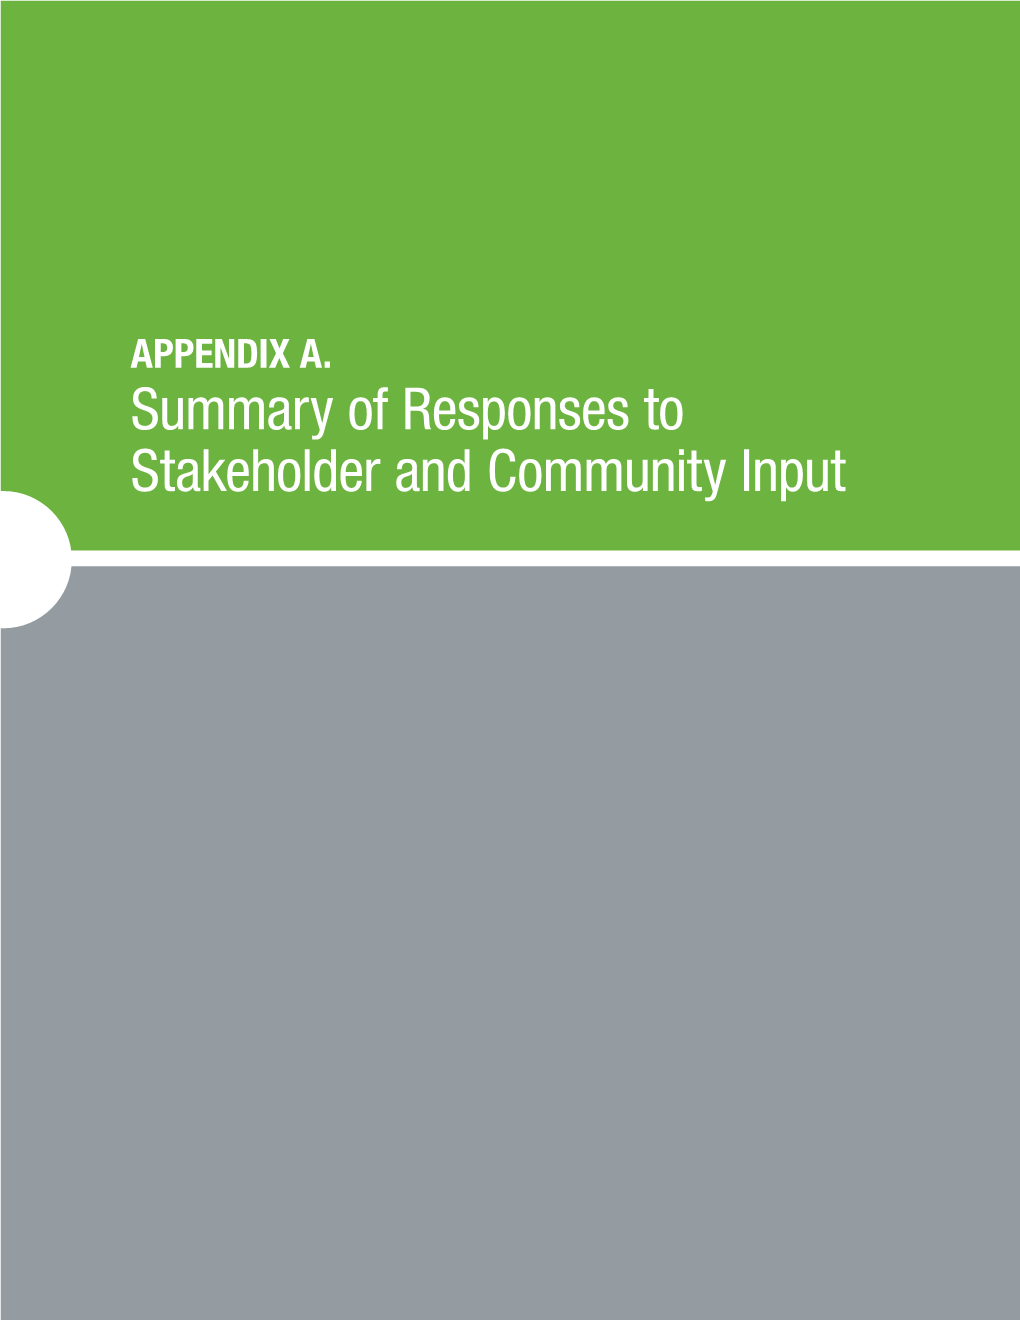 Appendix a – Summary of Responses to Stakeholder and Community Input